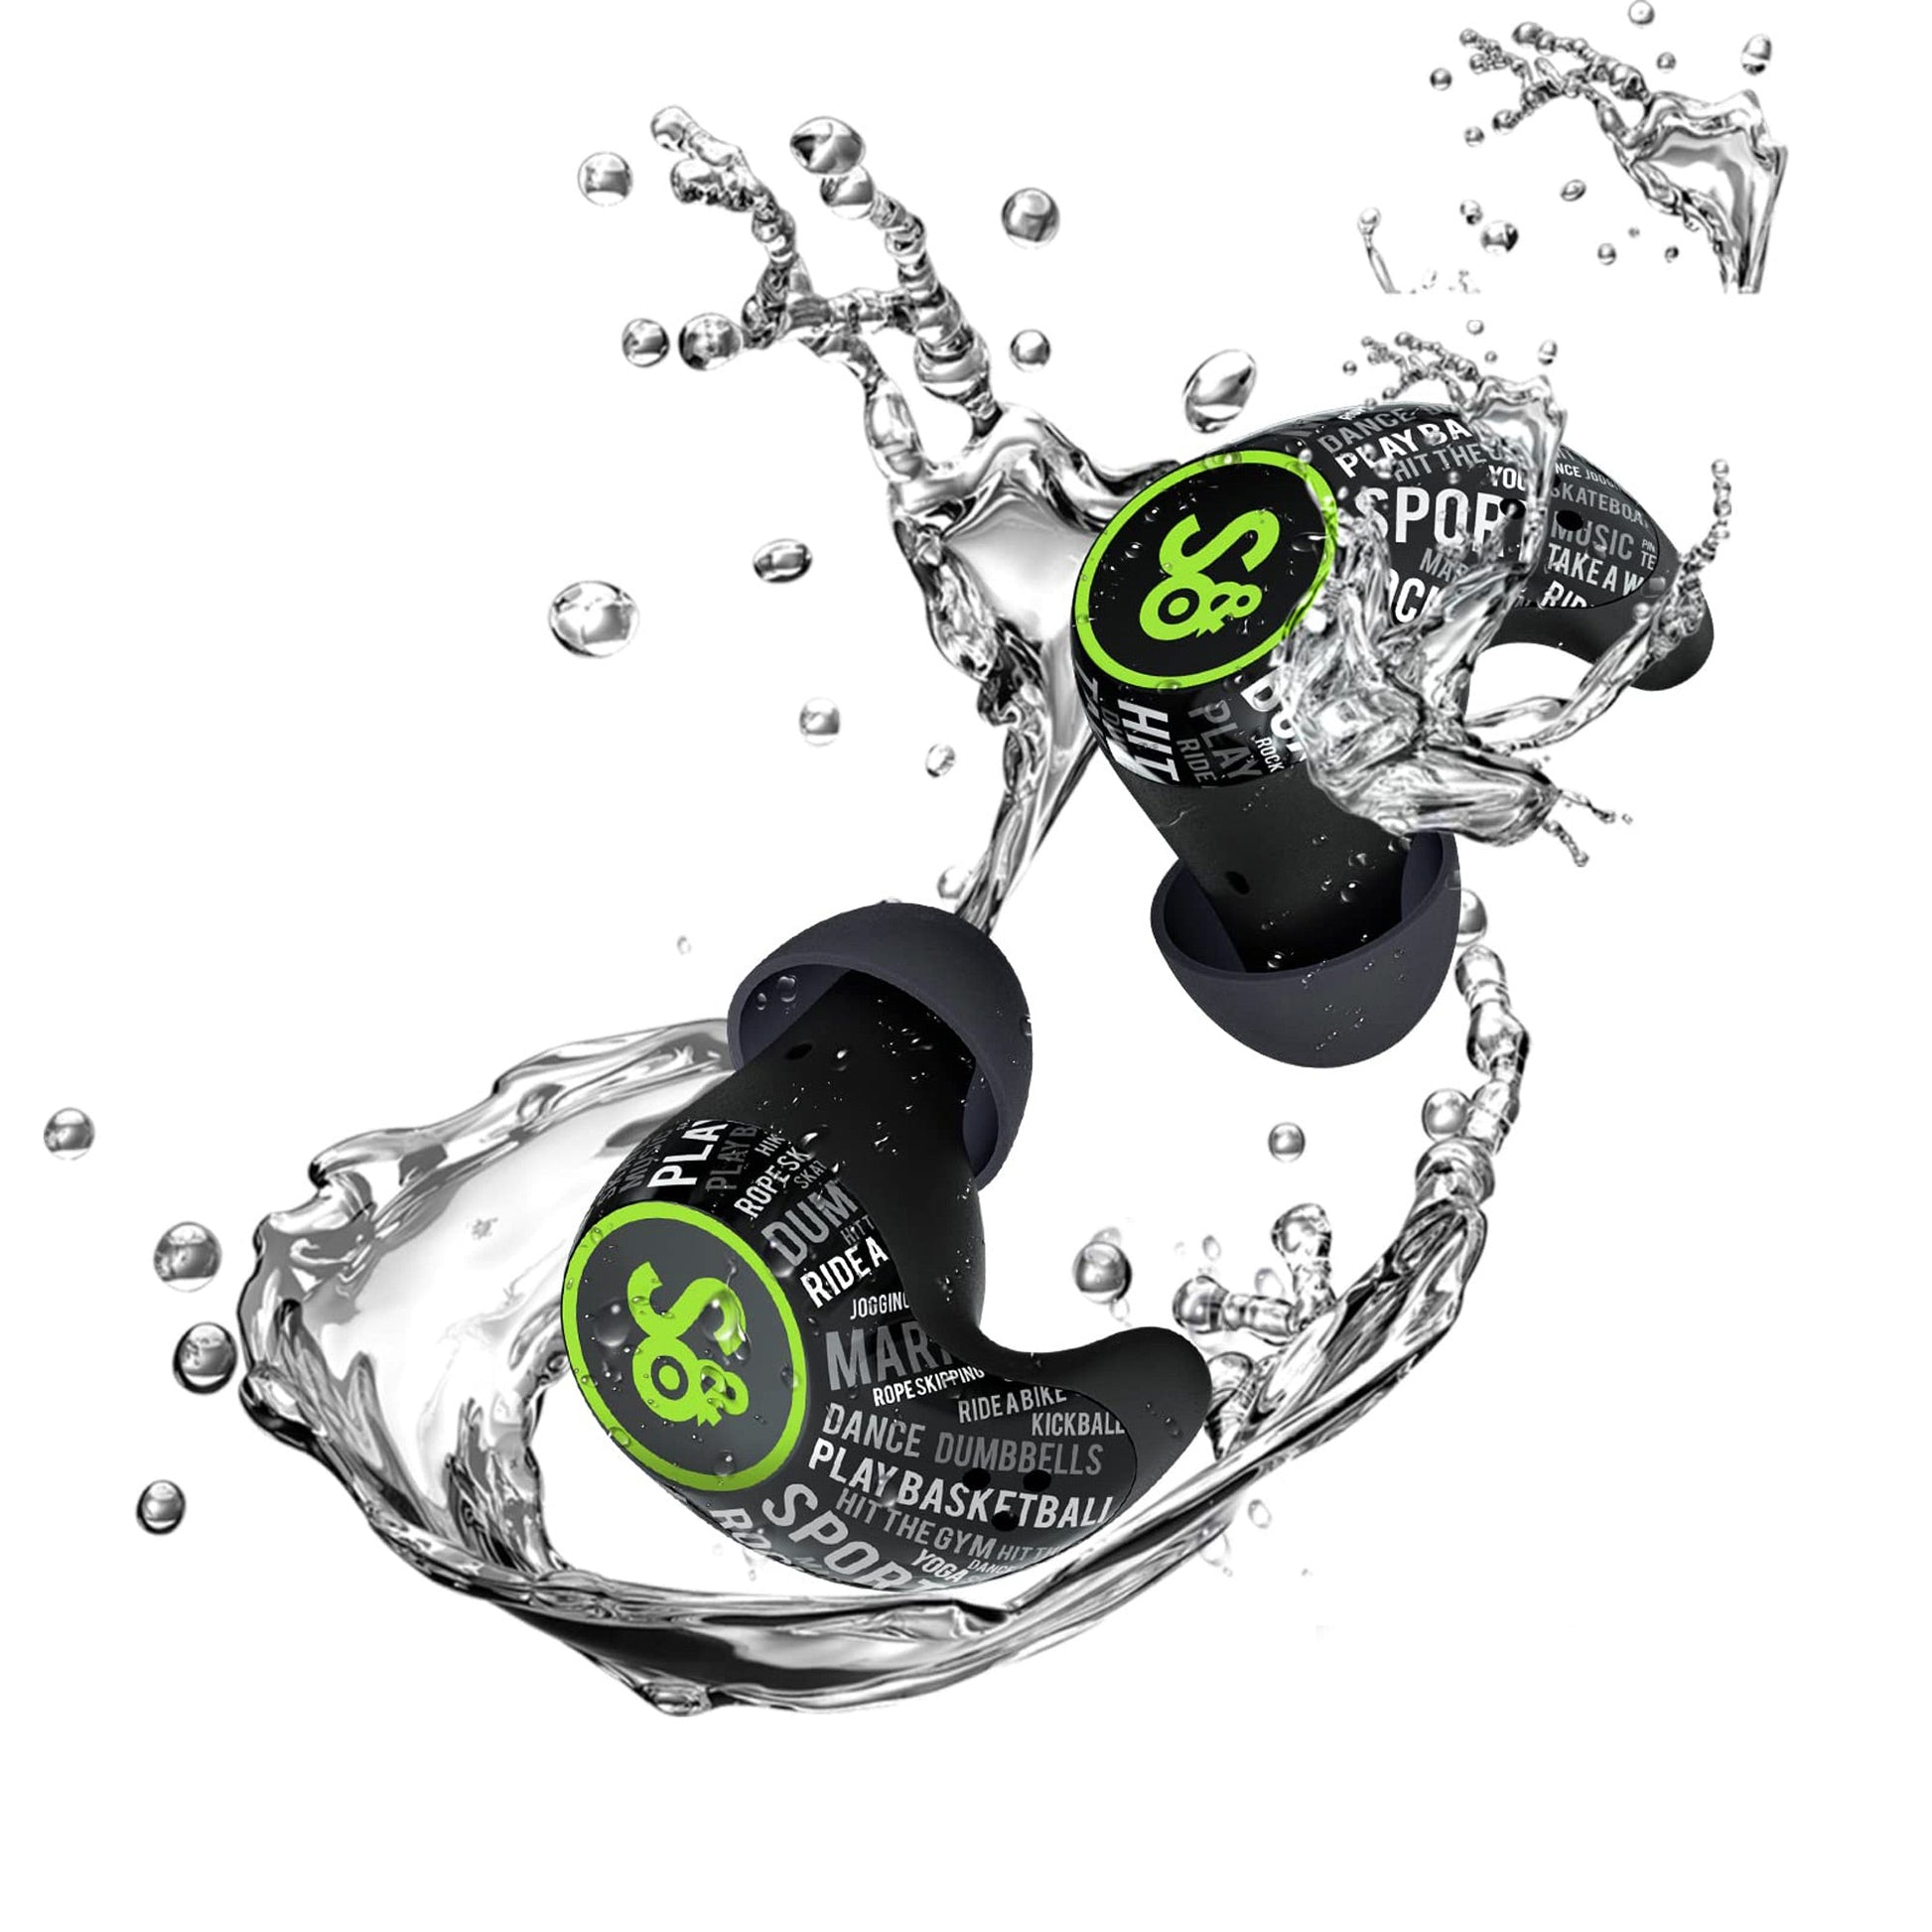 Water Proof Mifo S Sports Earbuds